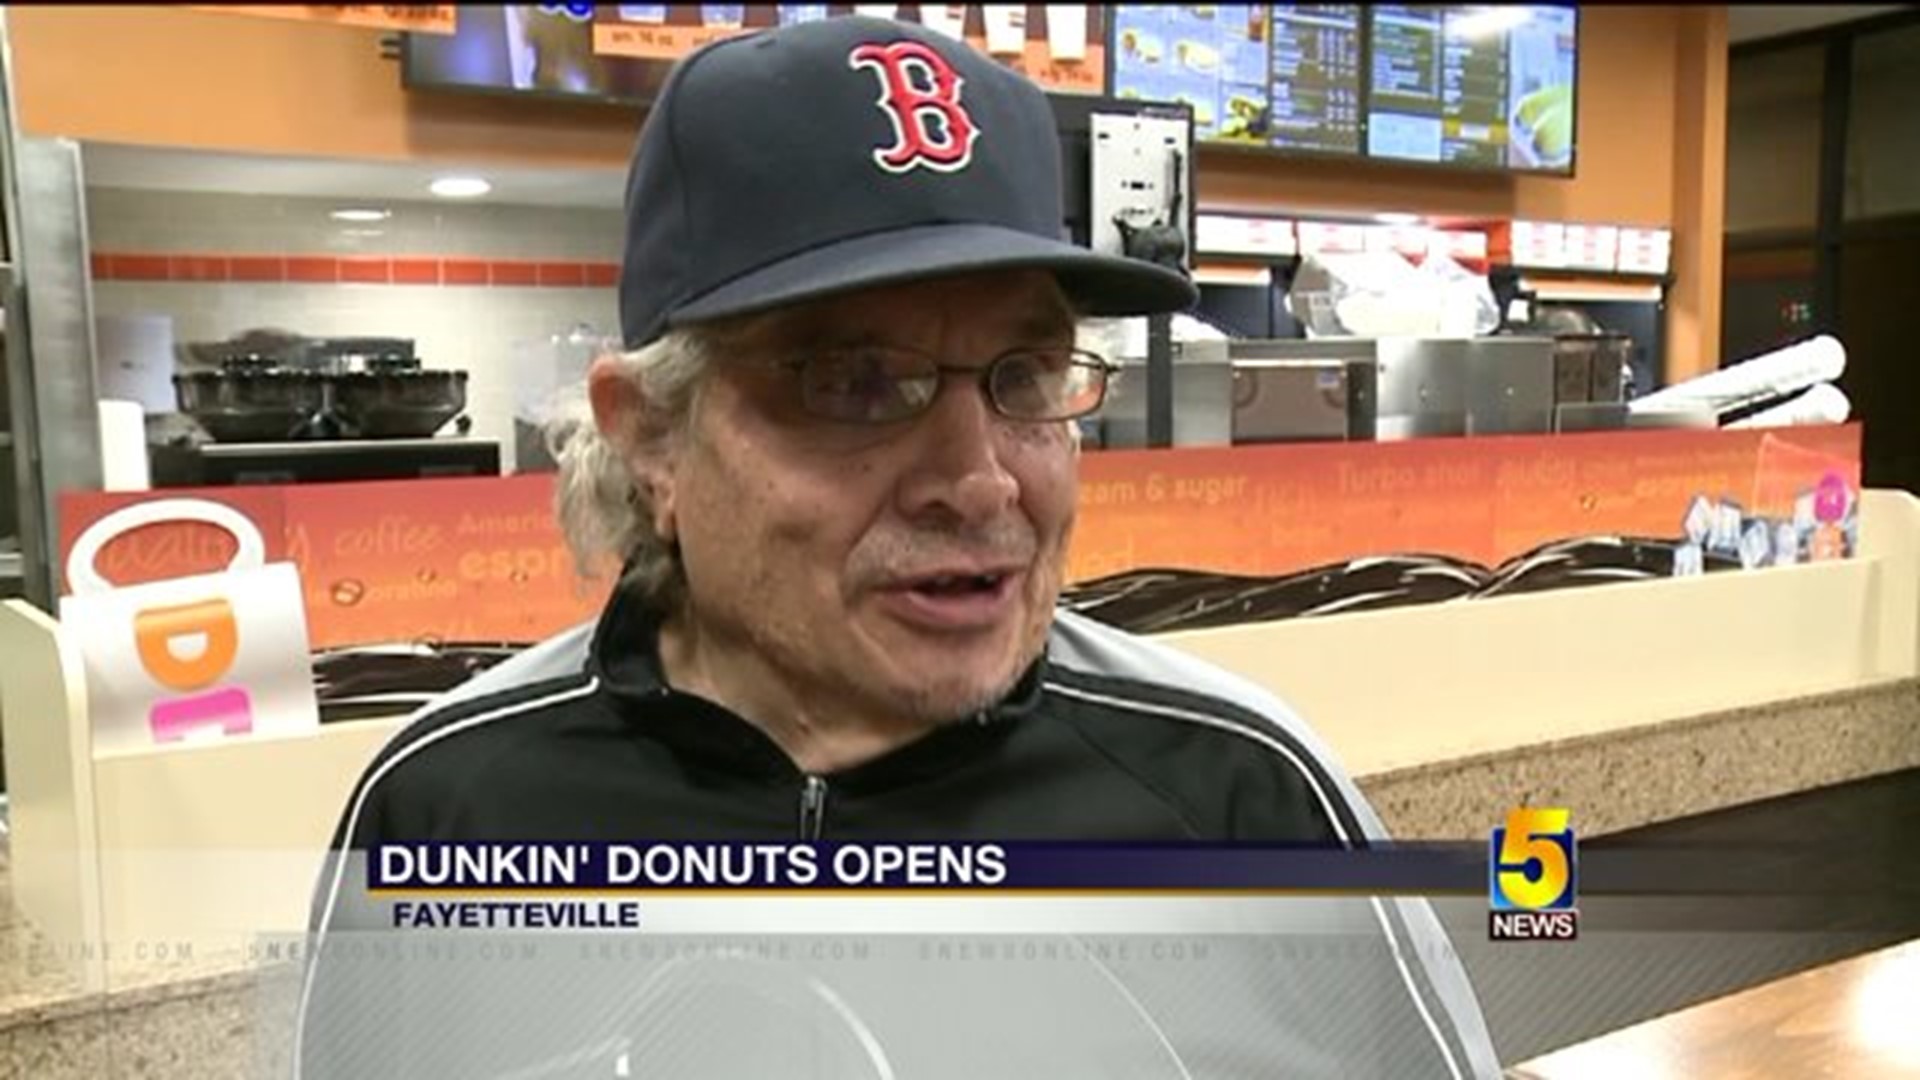 First Customer At The Fayetteville Dunkin` Donuts